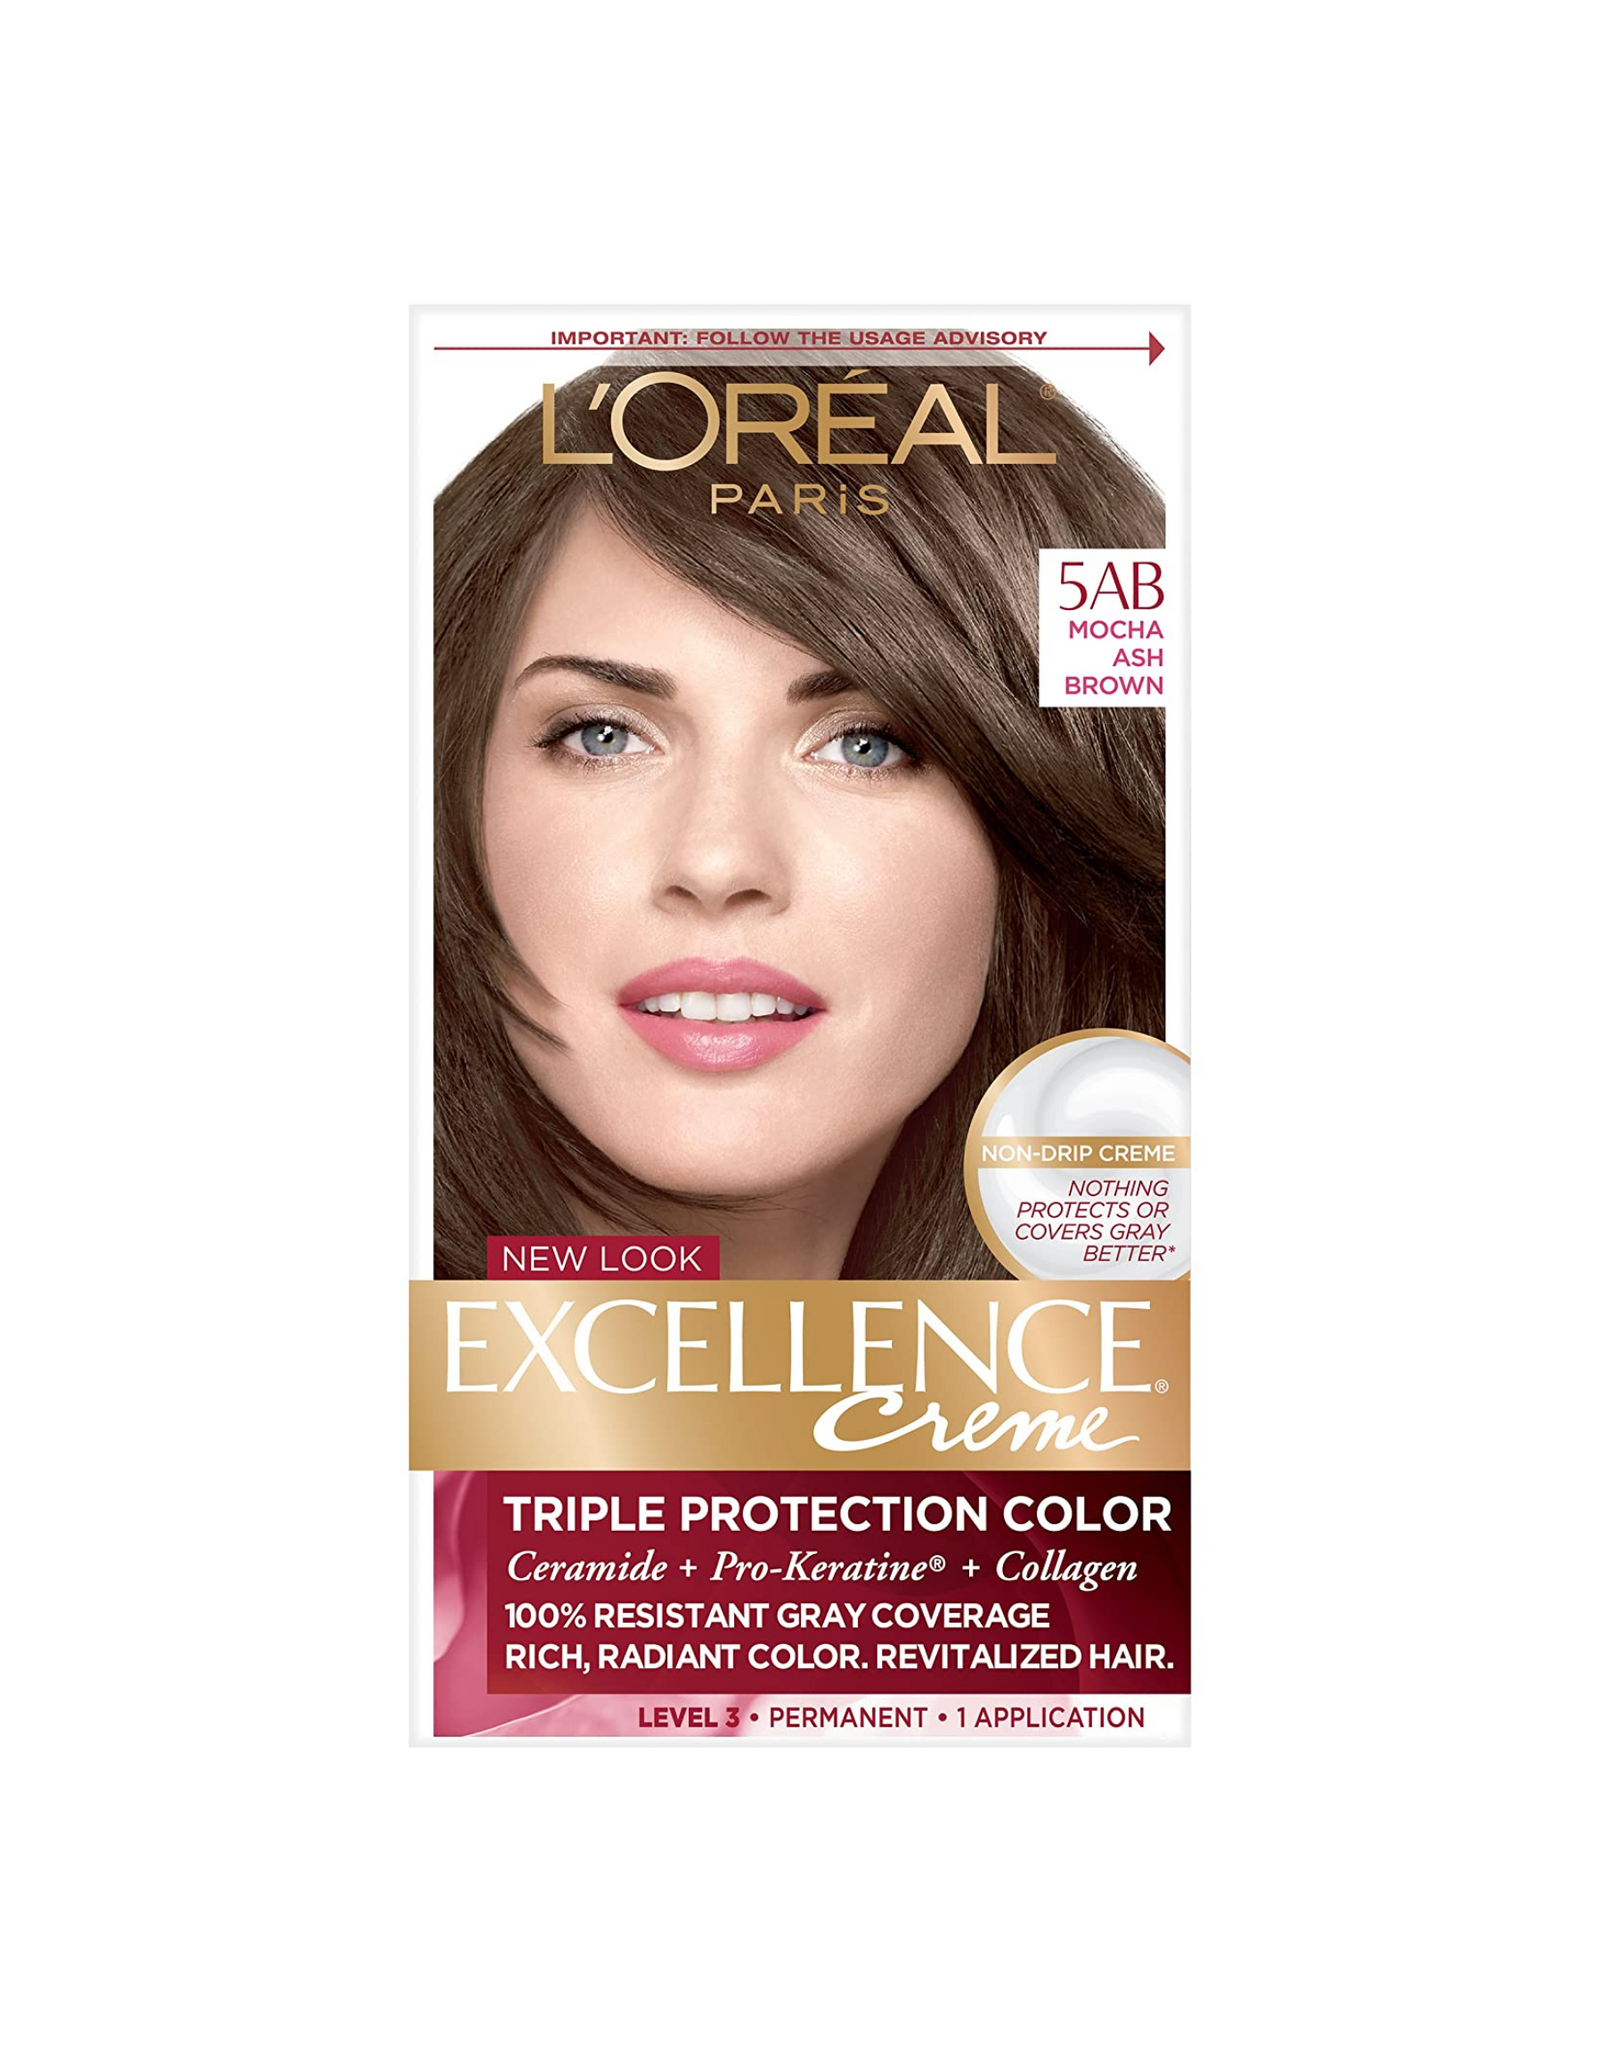 L'Oreal Paris Excellence Creme with Triple Protection Color, 5AB Mocha Ashe Brown, 1 Ct (Pack of 1)